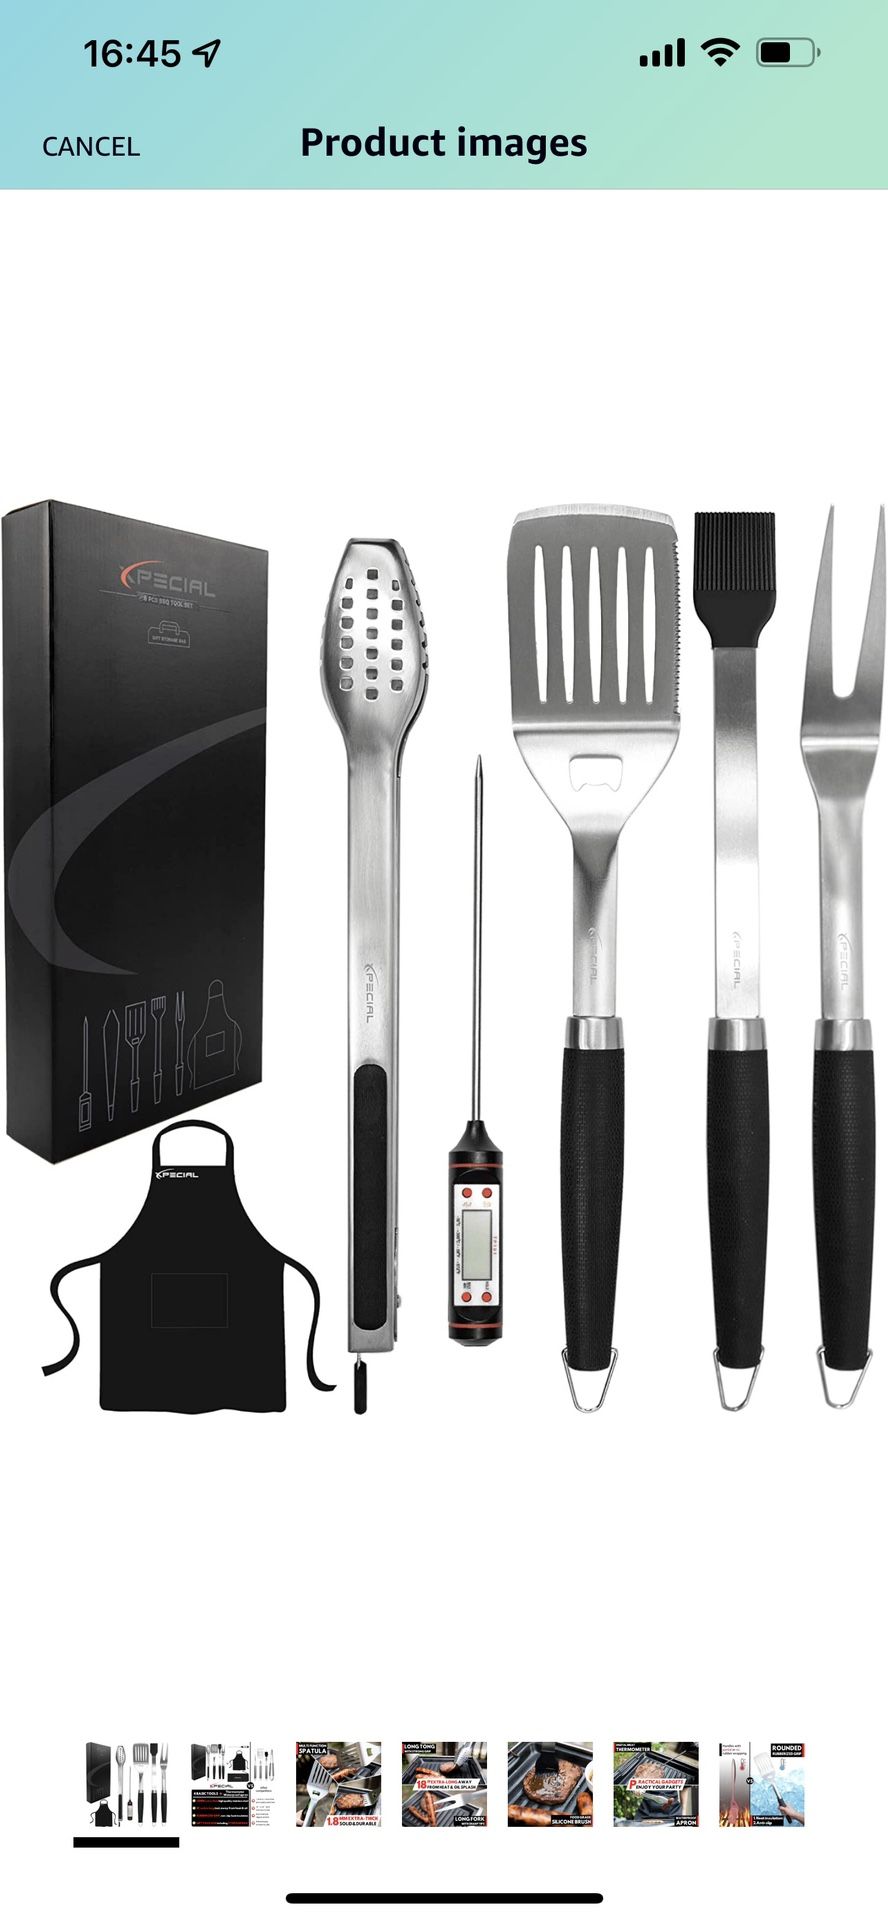 Large BBQ Tool Set - Longer & Thicker Heavy Duty Grill Tools, 18inch Stainless Steel Grilling Utensils Accessories with Rubberized Grips Spatula, Fork